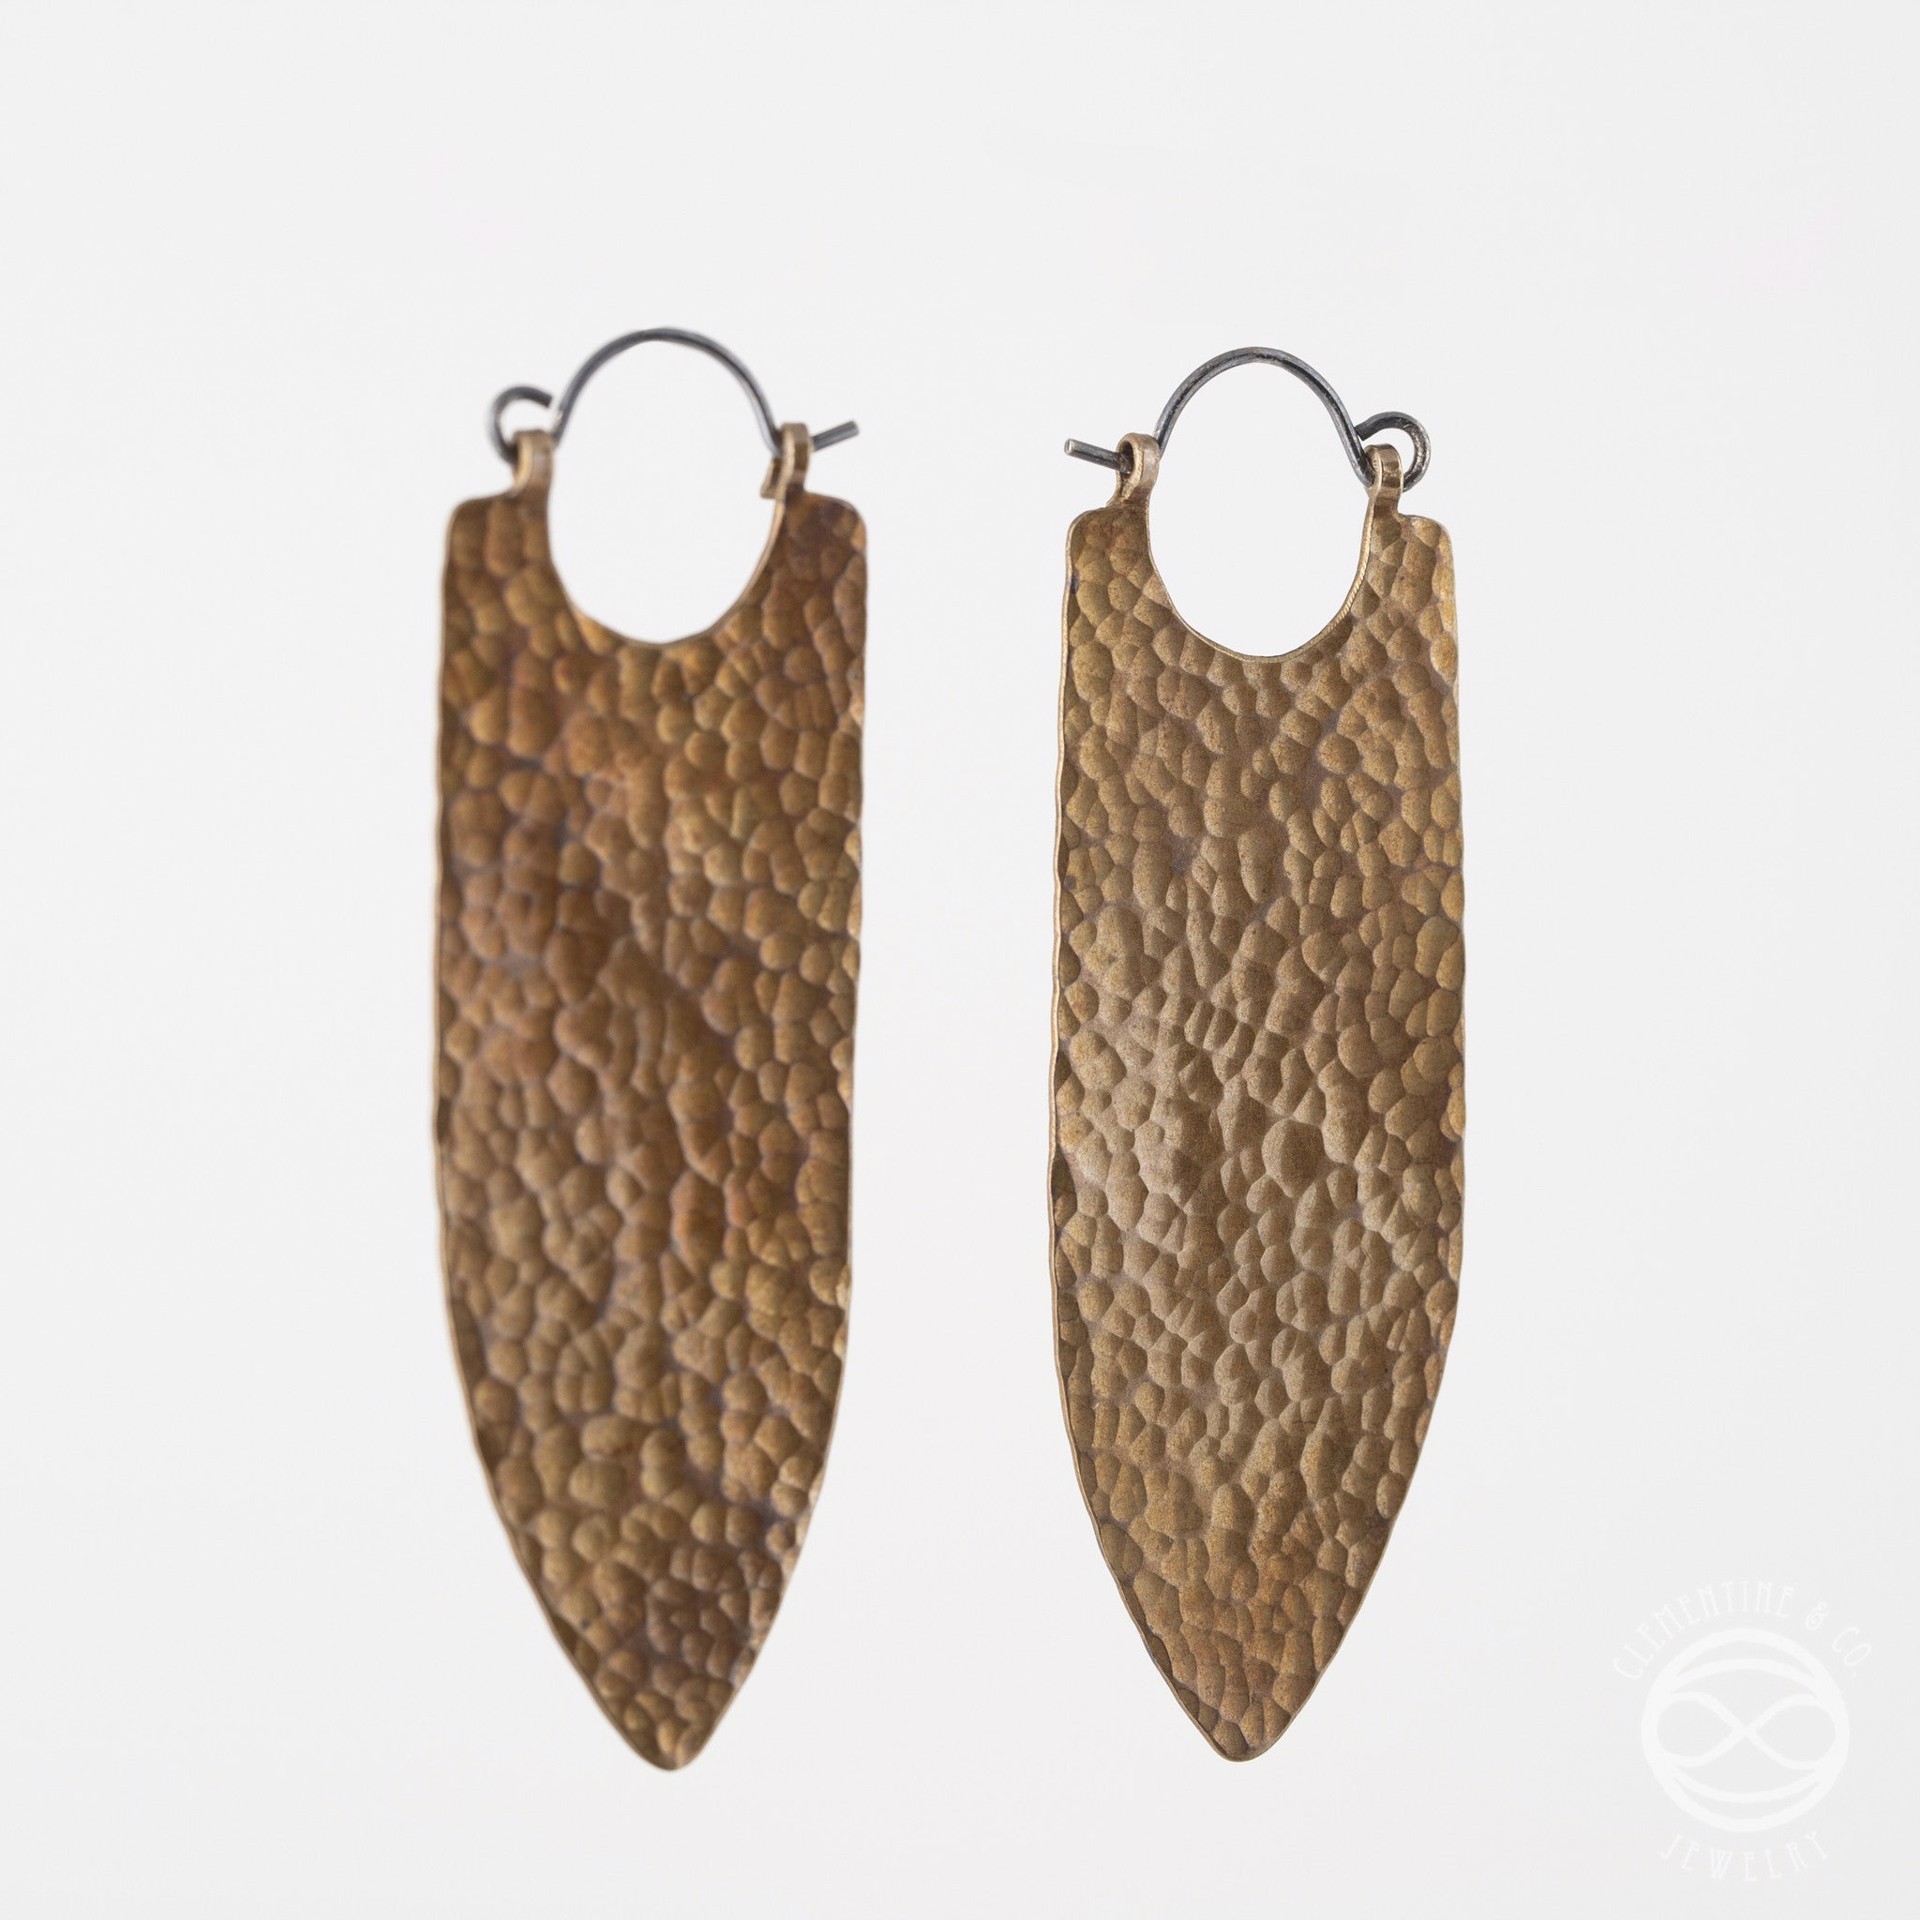 Banner Earrings in Antiqued Brass by Clementine & Co. Jewelry